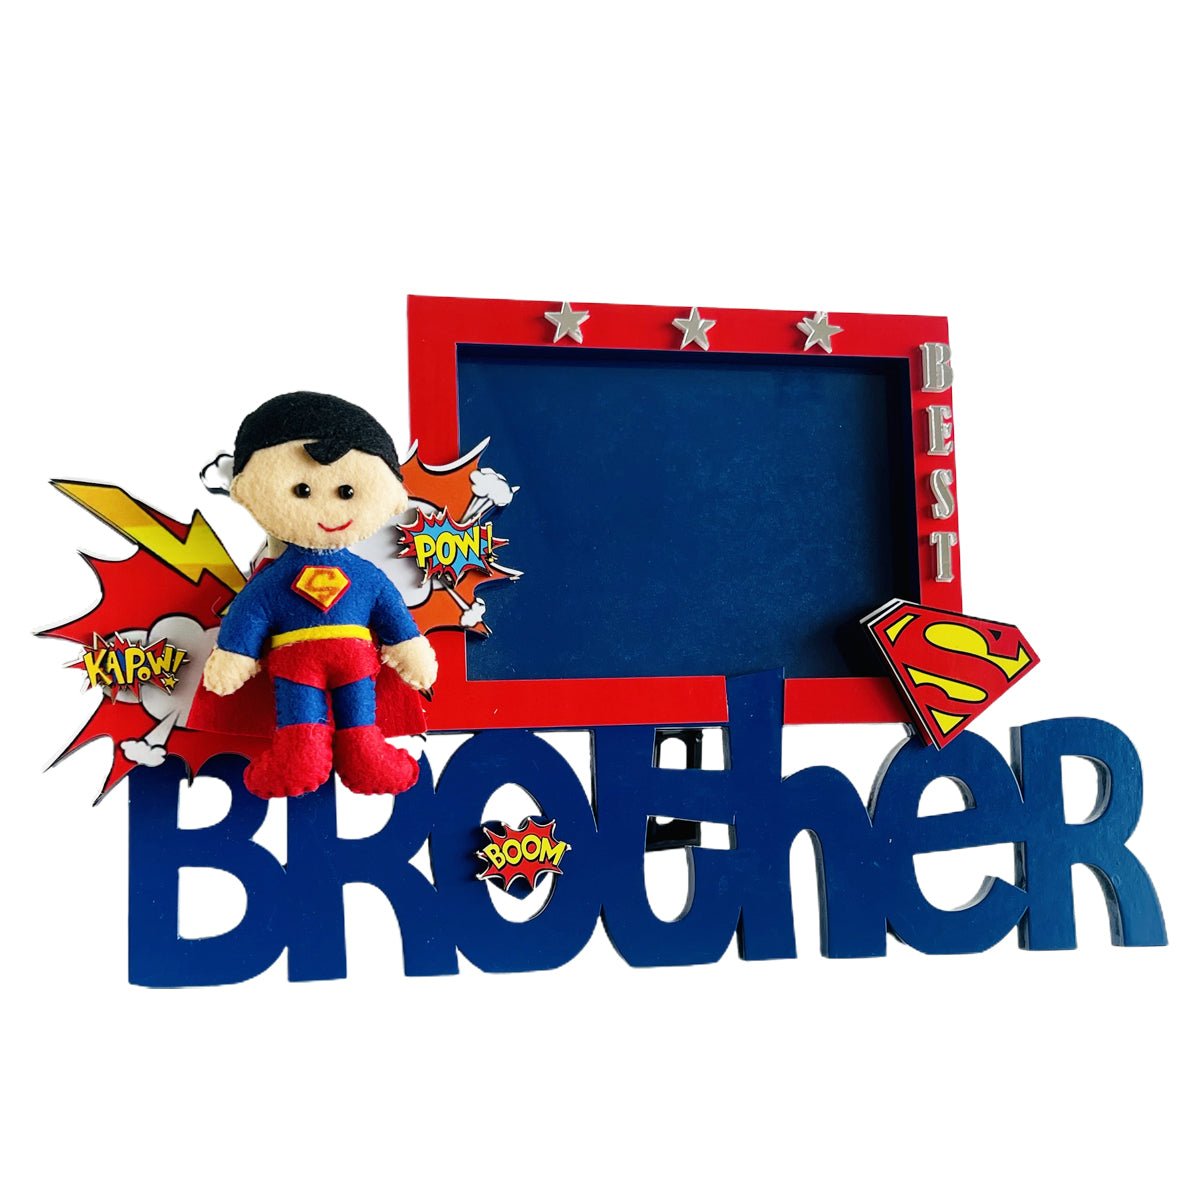 Best Brother Photo Frame - Little Surprise BoxBest Brother Photo Frame